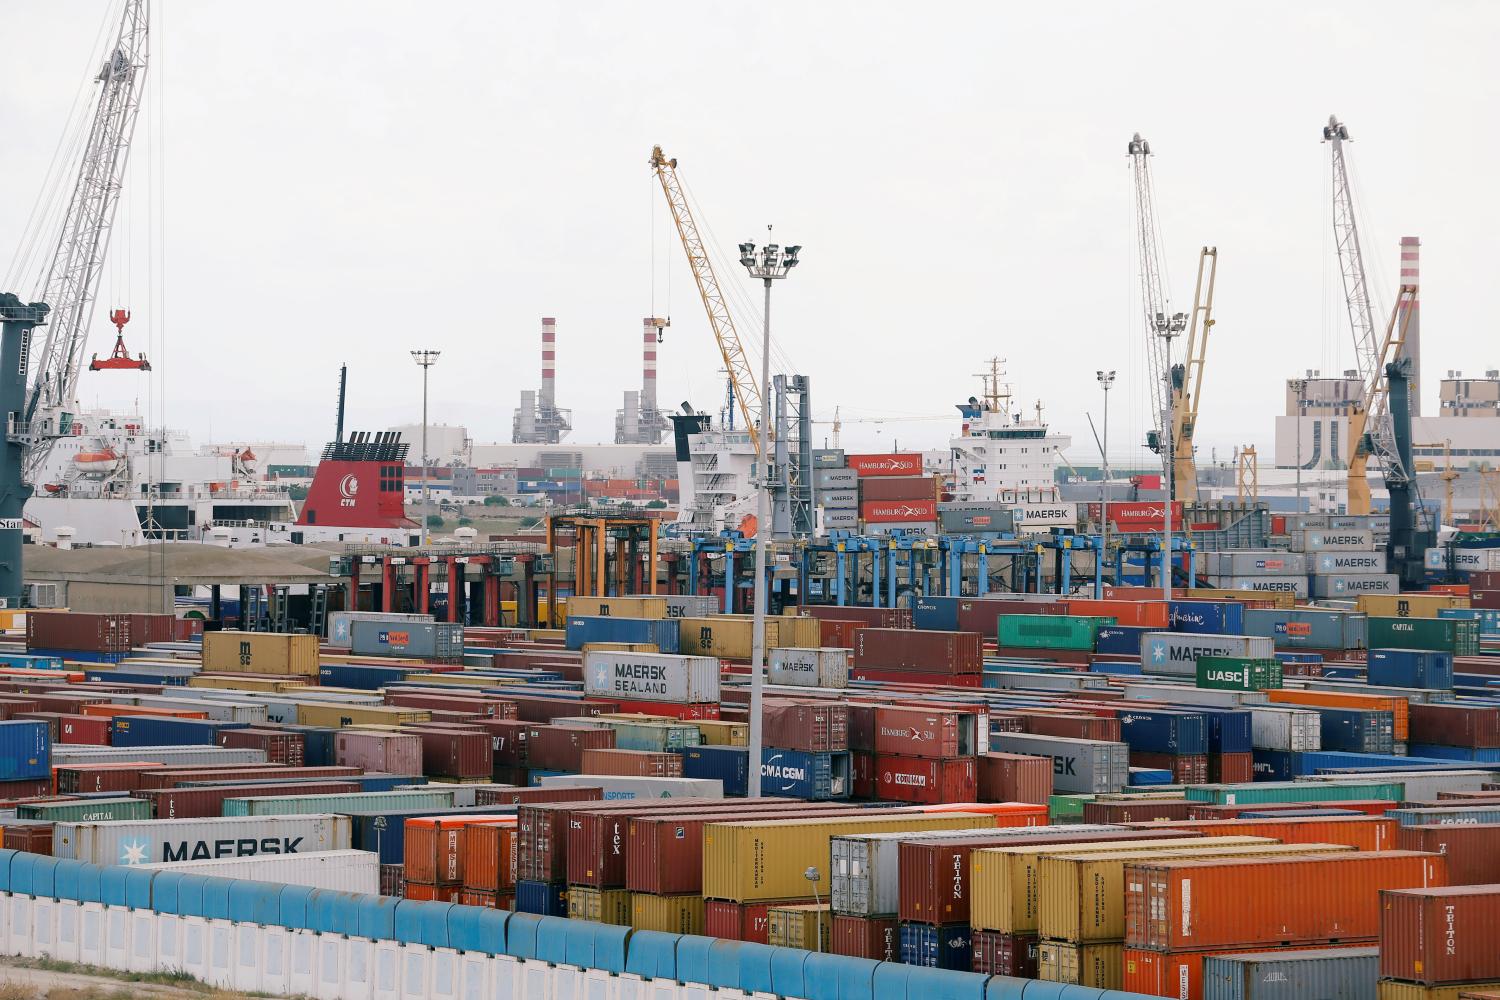 View of containers at a loading terminal in the port of Rades in Tunis, Tunisia August 15, 2018. REUTERS/Zoubeir Souissi - RC1E6B62C5F0